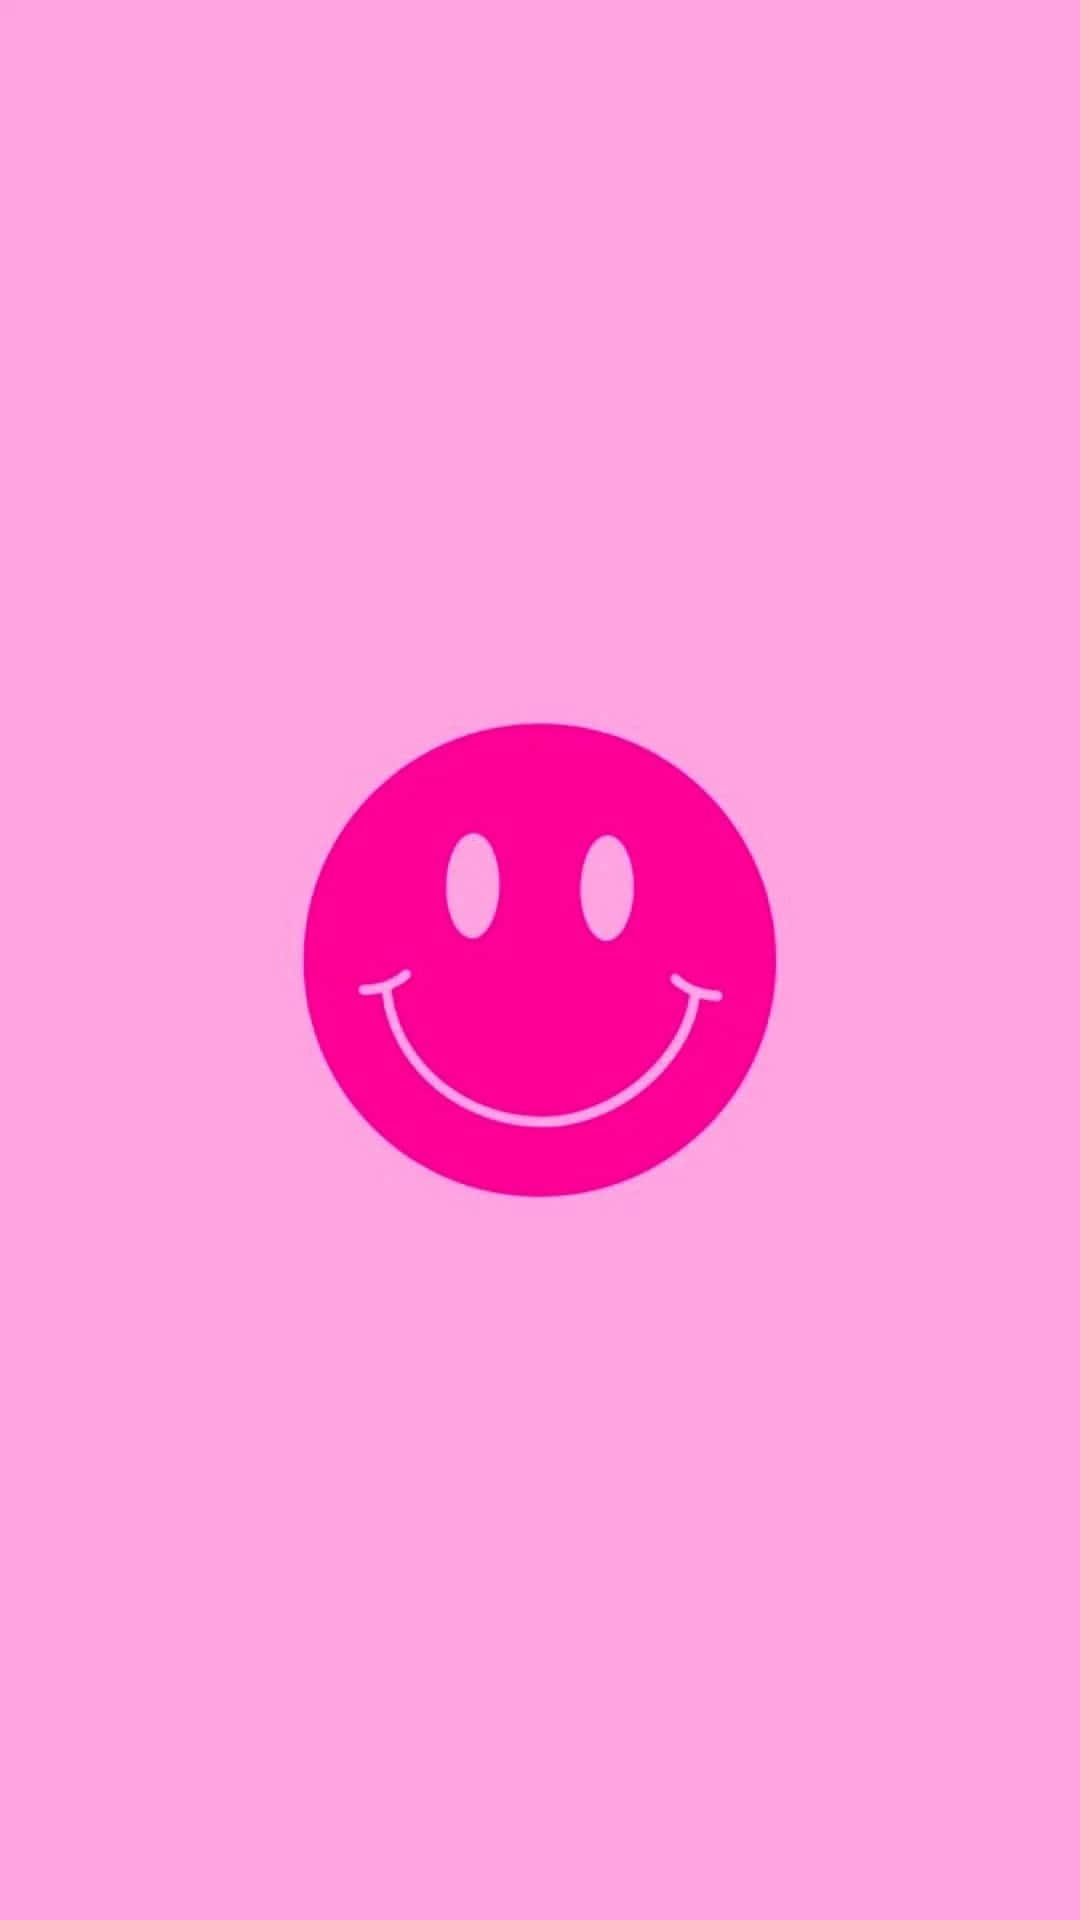 A pink smiley face on a pink background - Smile, Smiley